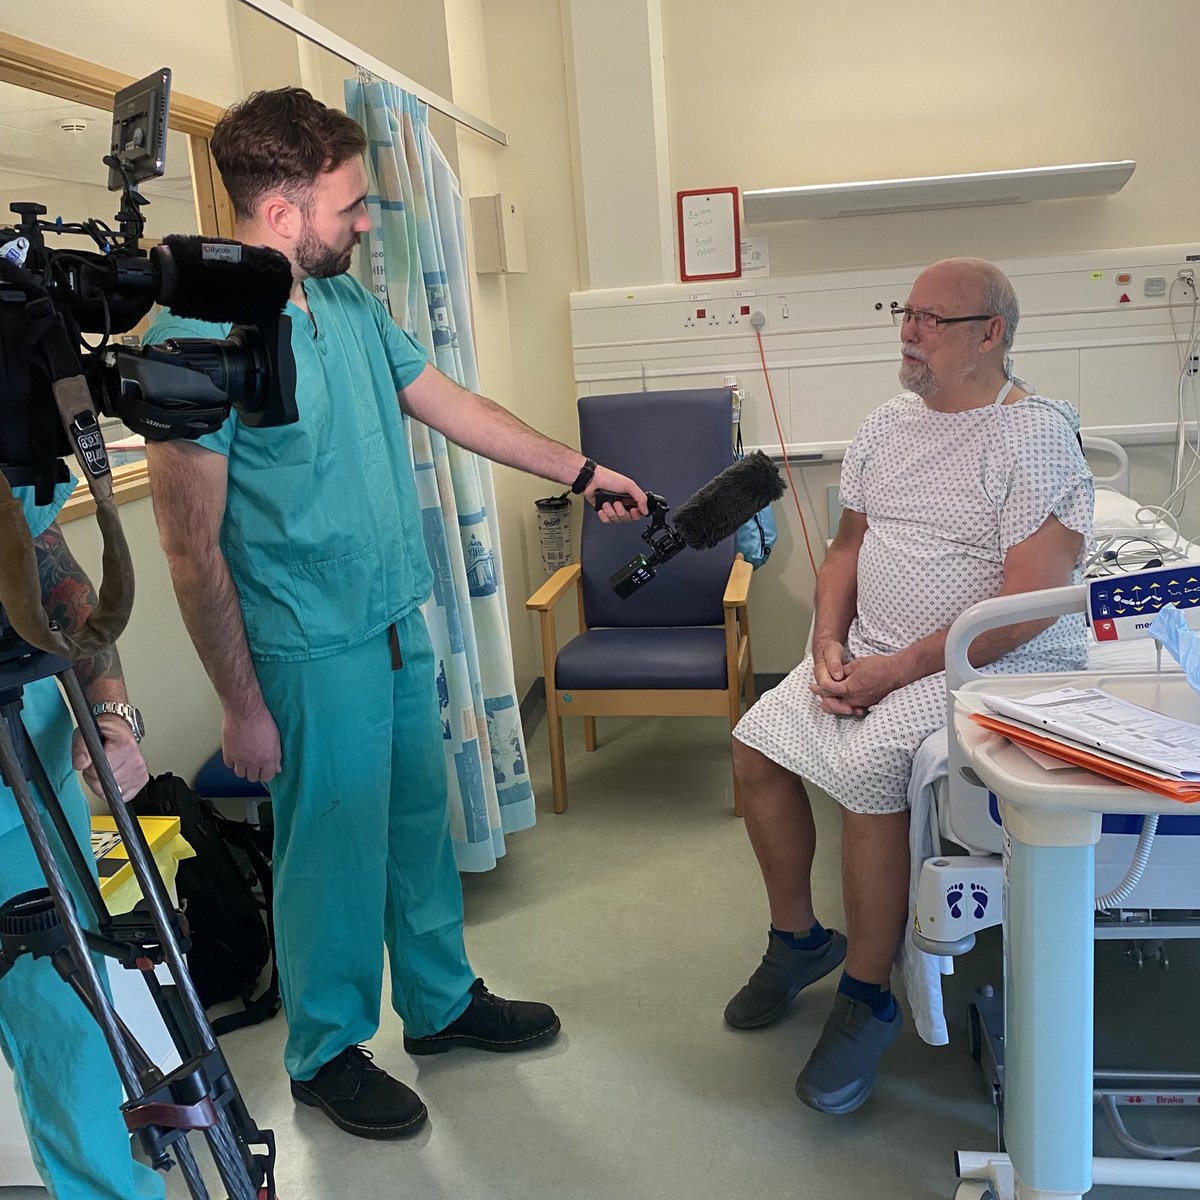 Tune into @BBCEMT tonight to find out about our new cardiology service for patients with refractory angina. Dr Andrew talks about the service and how it benefits patients. We are proud to be the first trust in the East Midlands to offer the service. 📺6.30pm tonight on BBC One